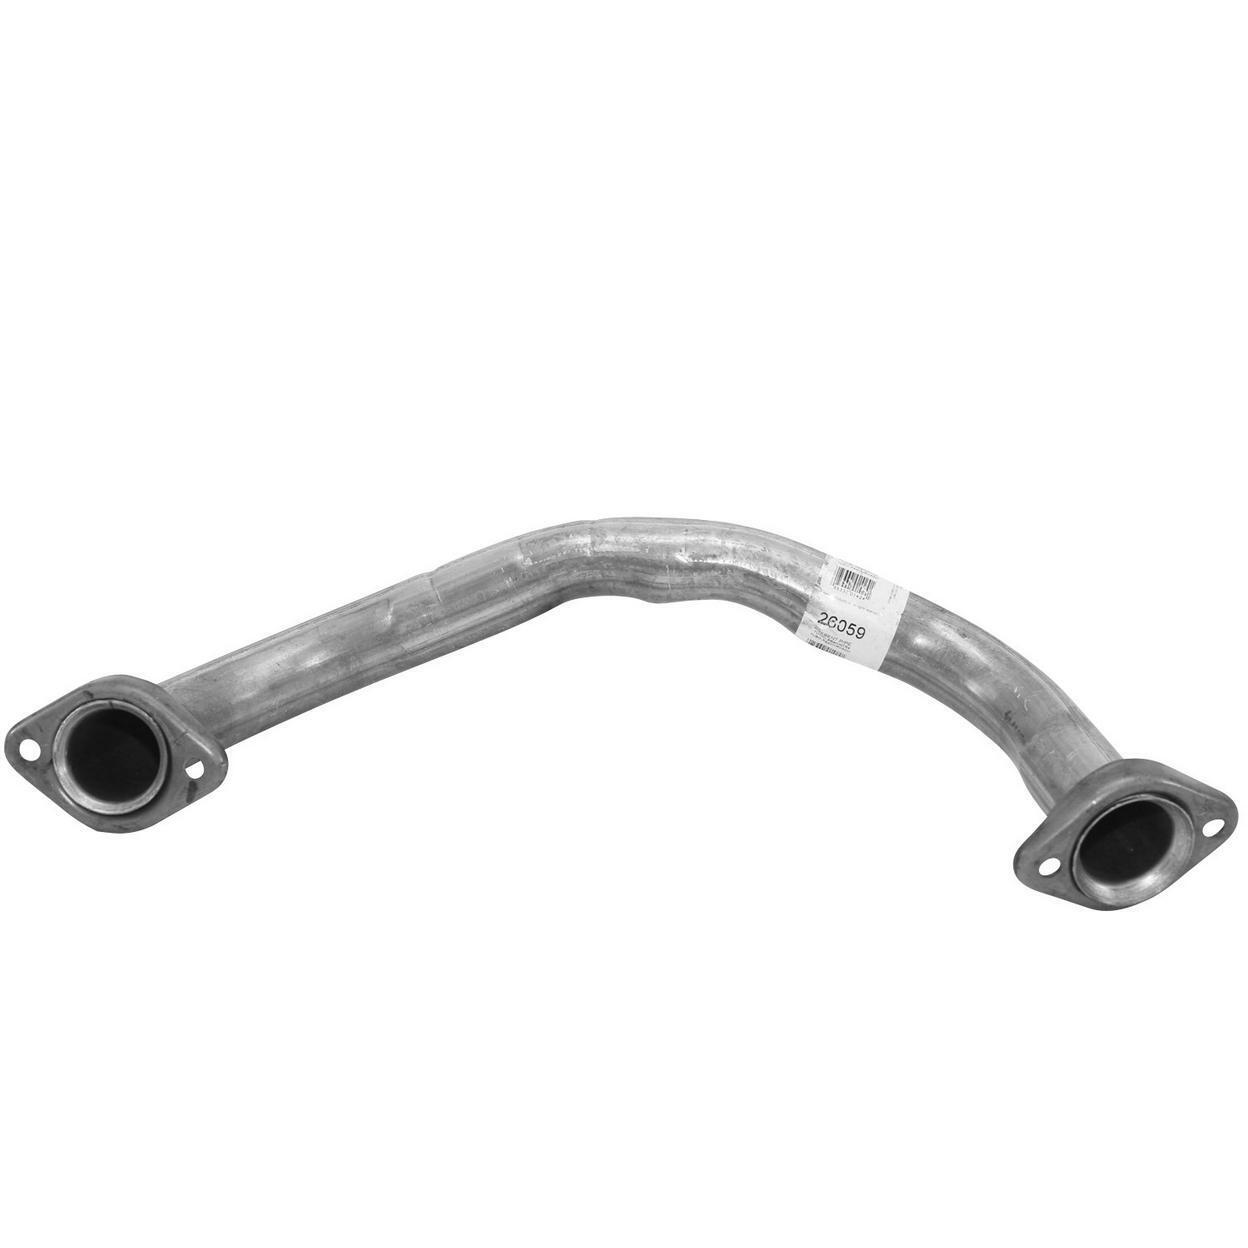 26059-HT Exhaust Pipe Fits 1980 Oldsmobile Cutlass Supreme 5.7L V8 GAS OHV